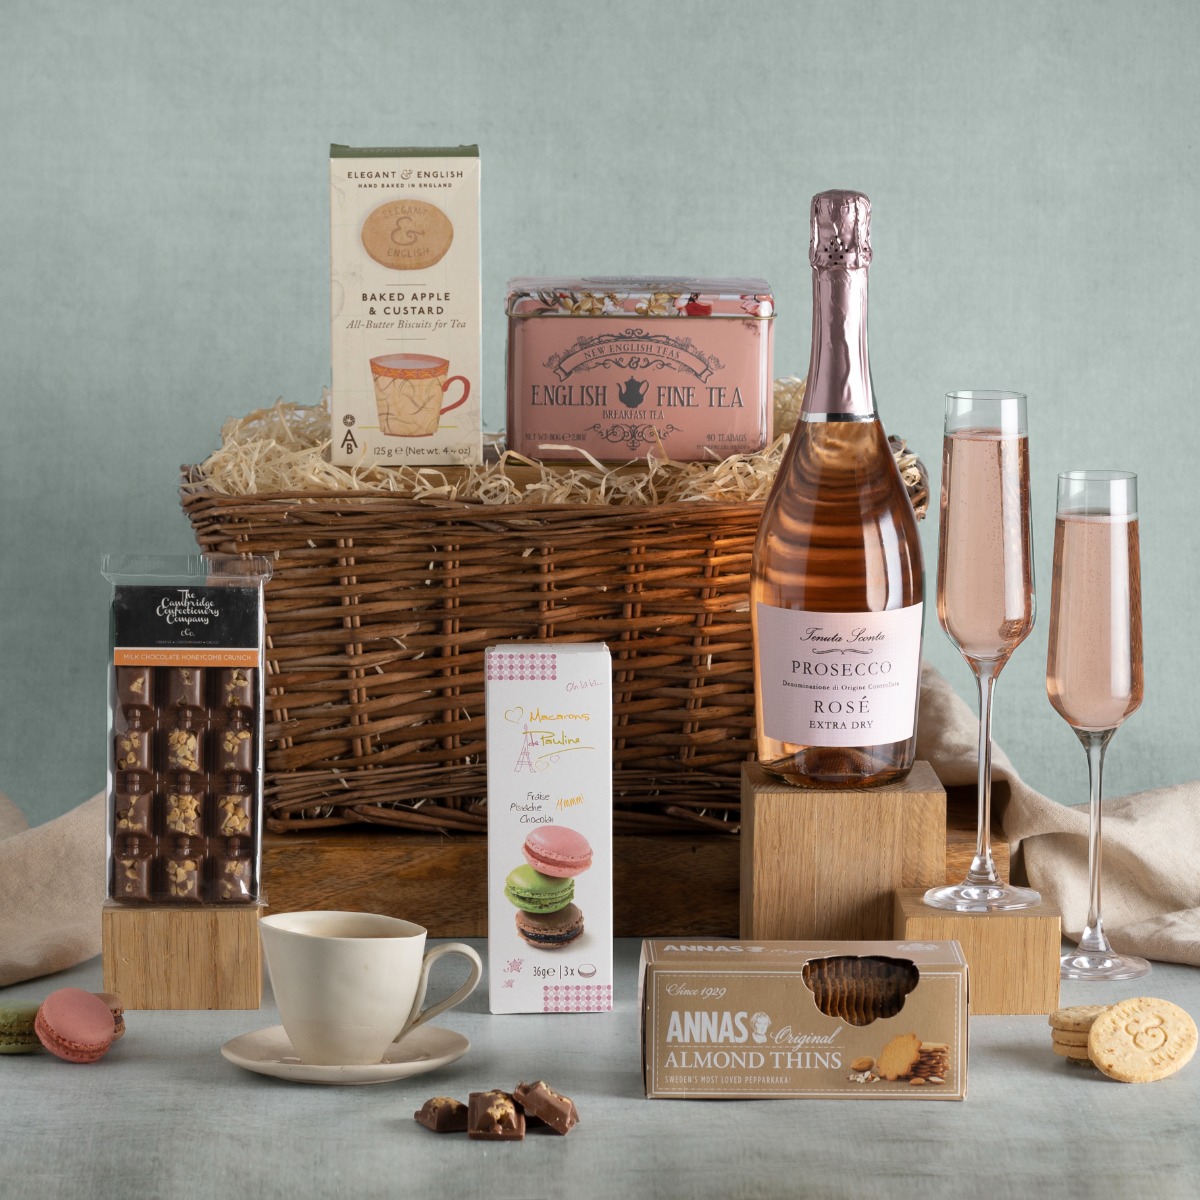 Valentine's Couples Sharing Hamper with contents on display including a bottle of Prosecco Rose